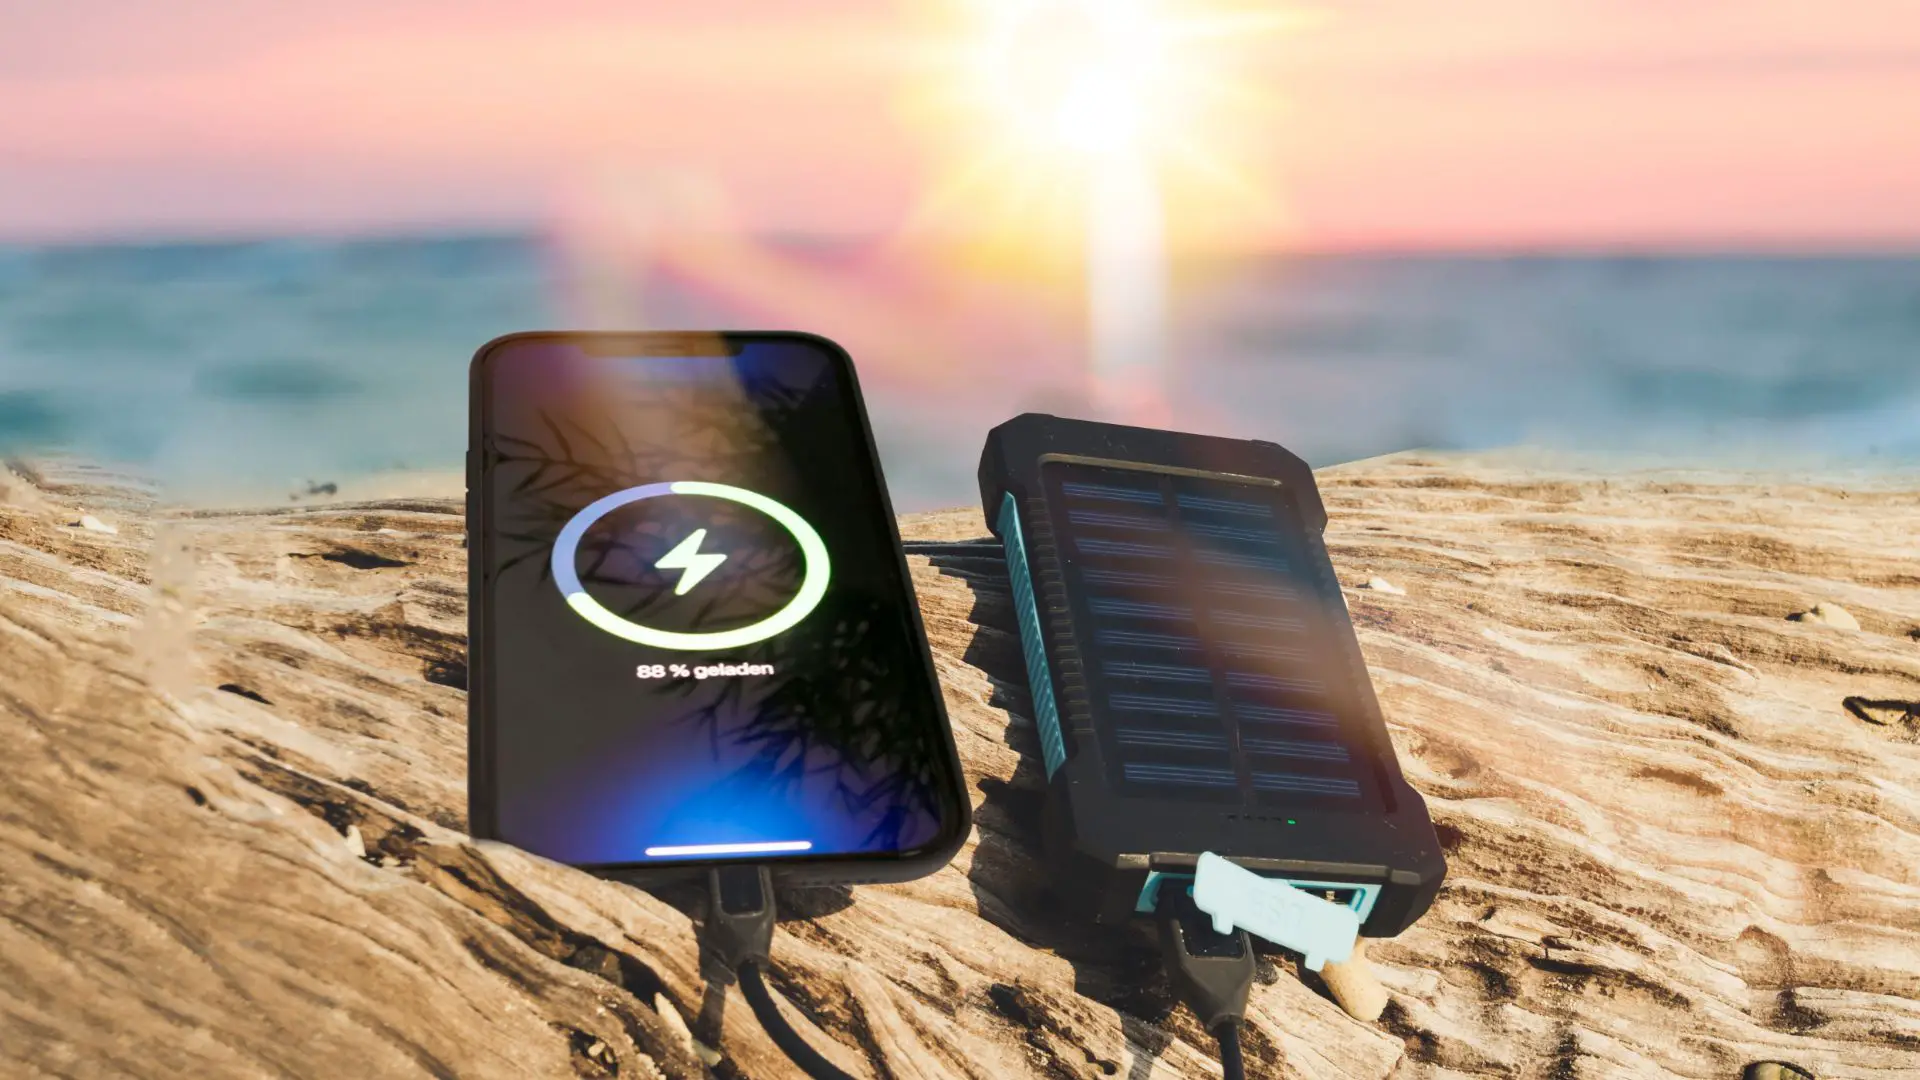 How to charge solar power bank in the sun